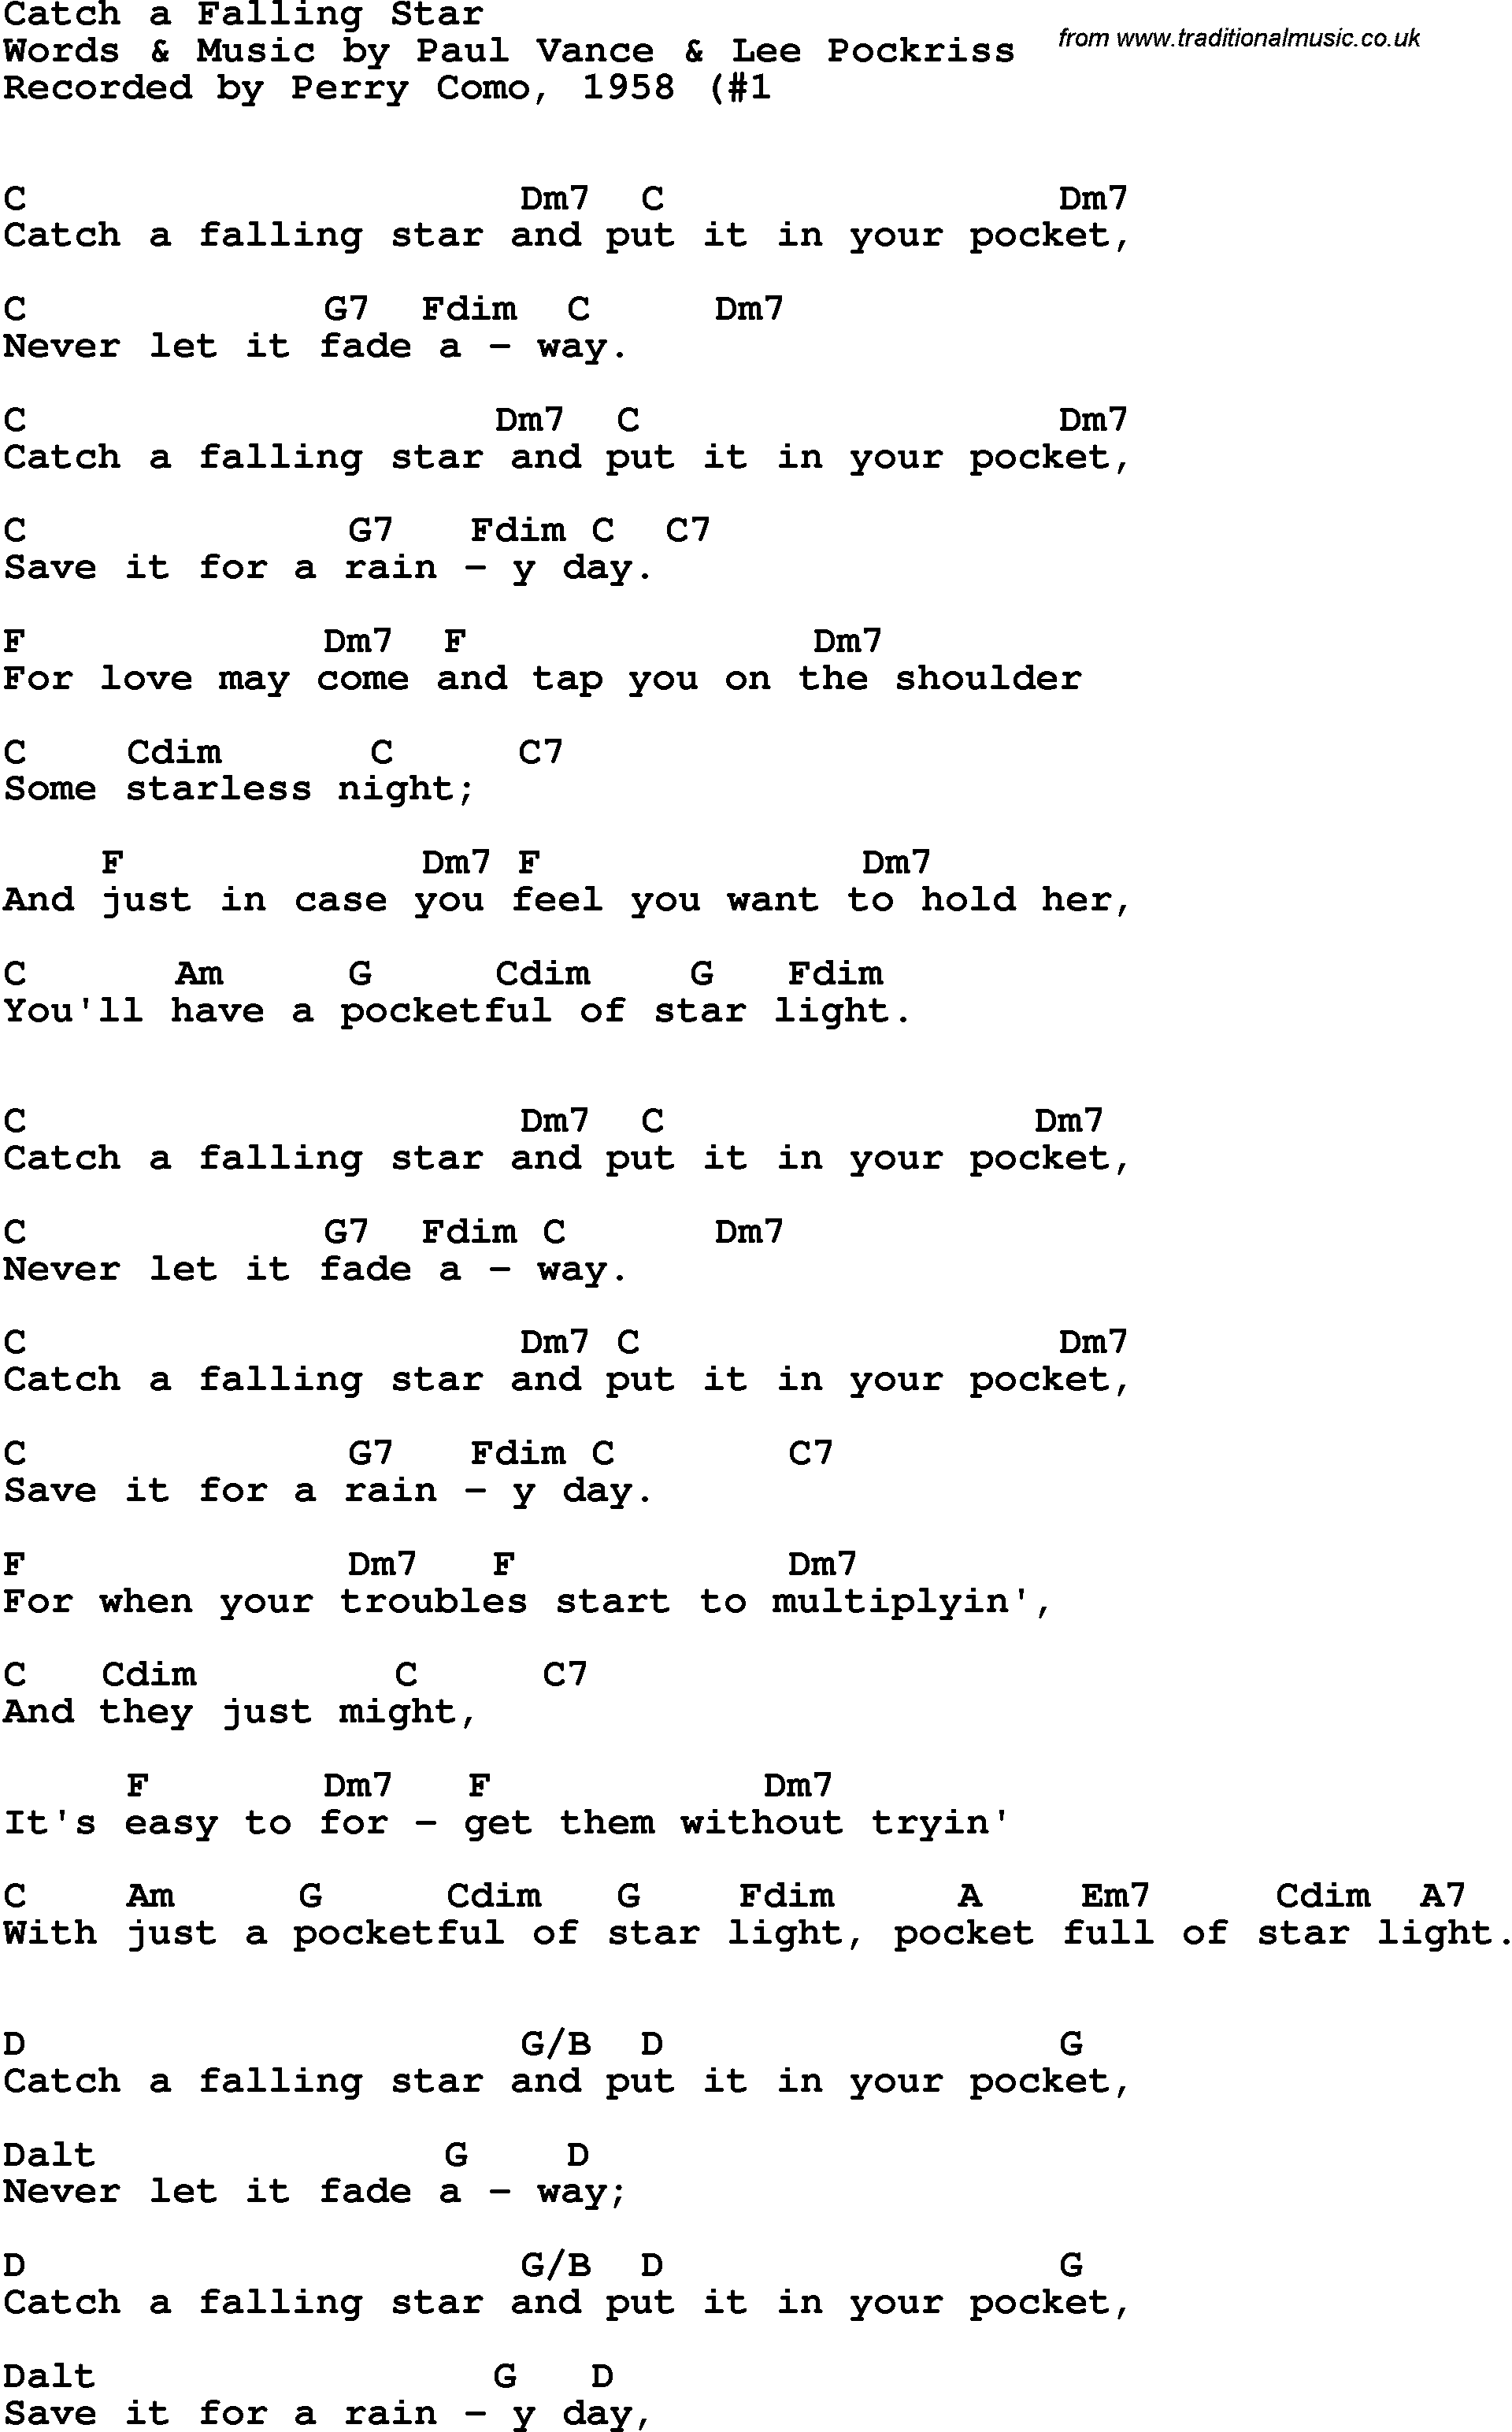 Song Lyrics with guitar chords for Catch A Falling Star - Perry Como, 1958